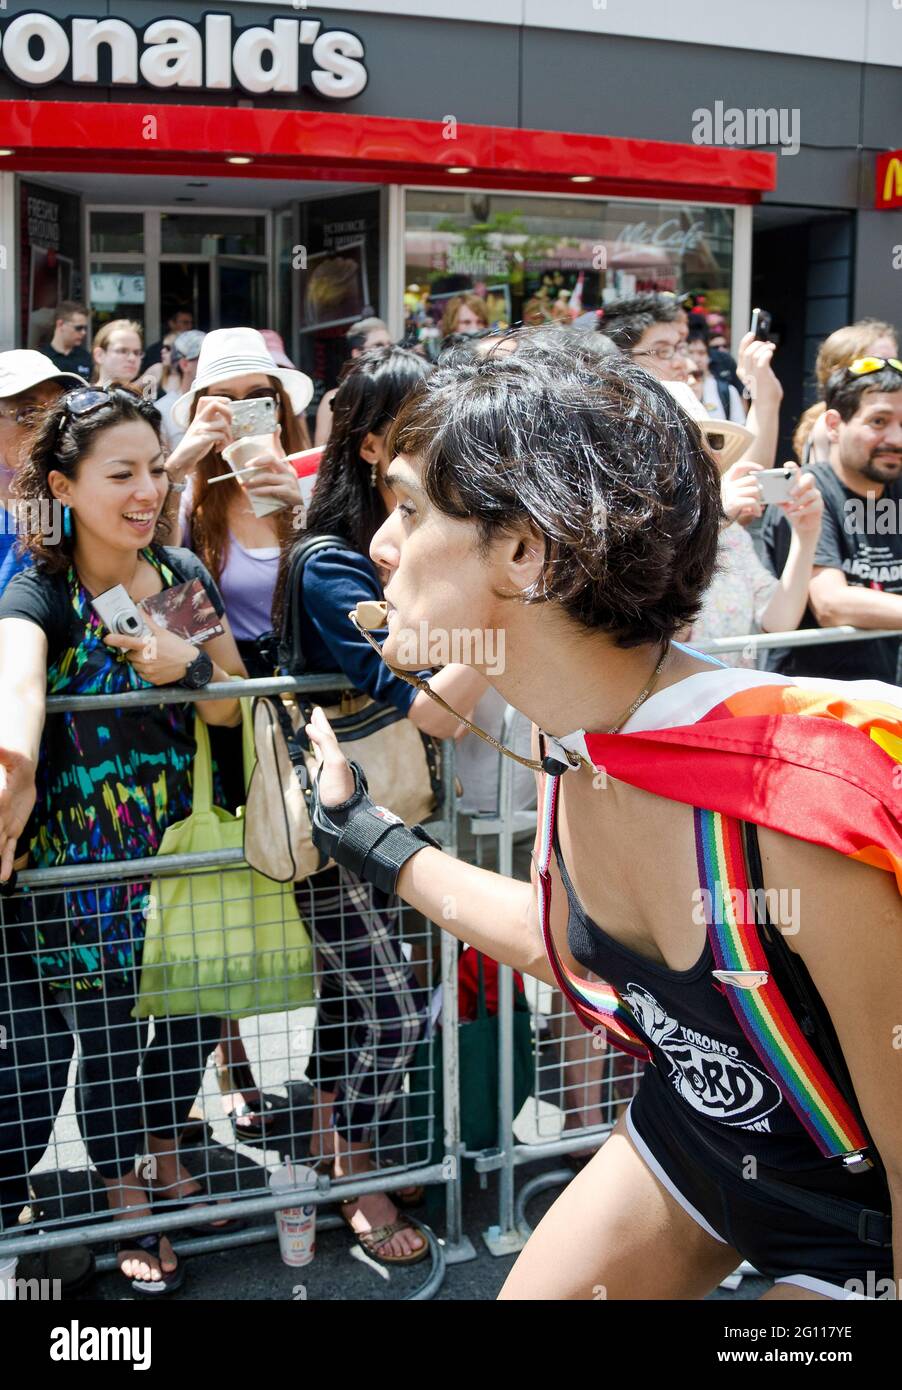 Woman blowing whistle at pride parade Toronto, wearing a cape and performing while passing in front of a crowd cheering from the sidelines Stock Photo